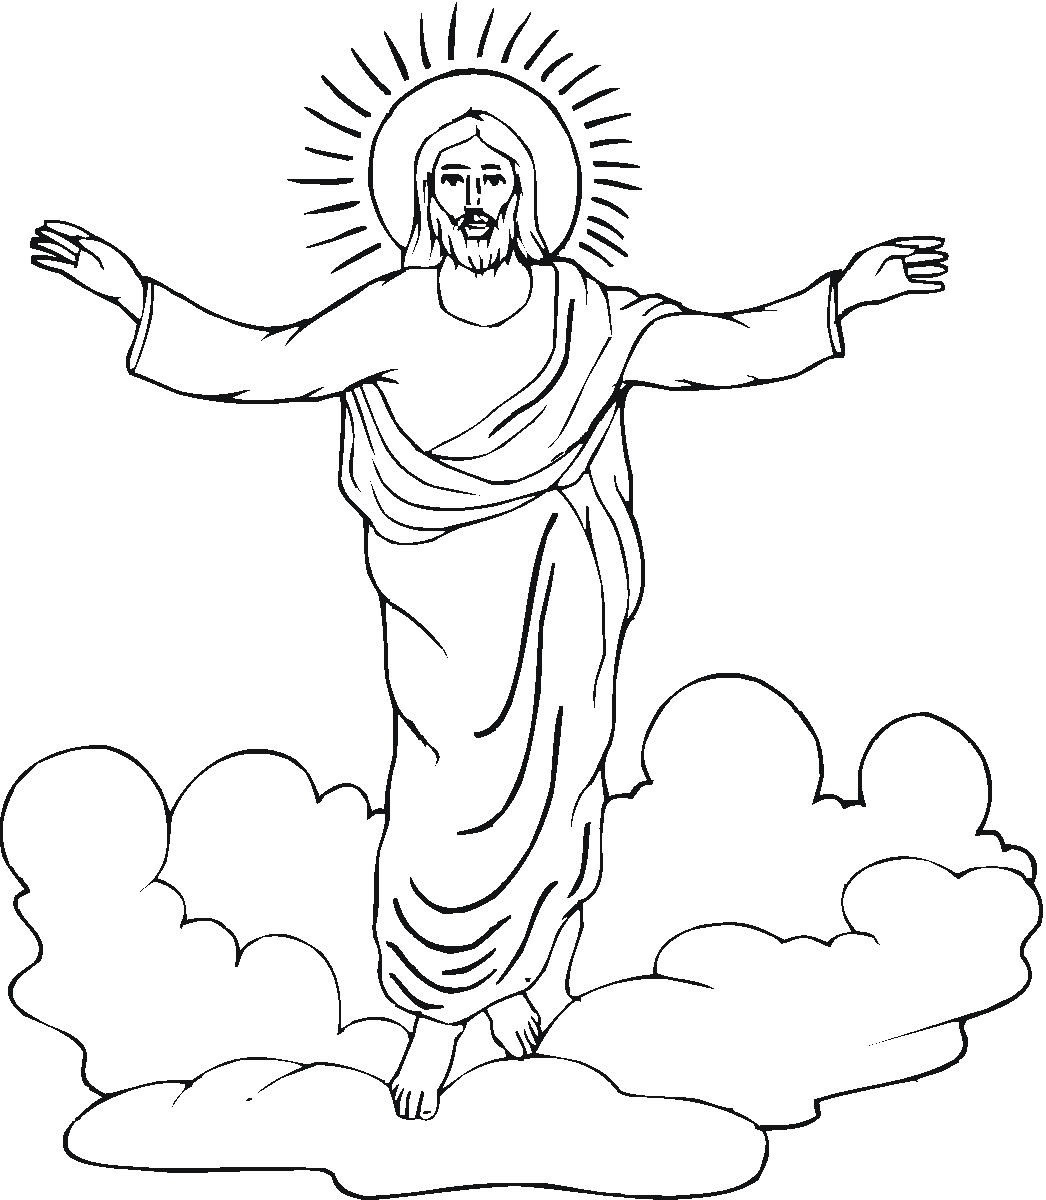 Jesus Coloring Pages For Kids Printable
 EASTER COLOURING RELIGIOUS EASTER COLORING PICTURE